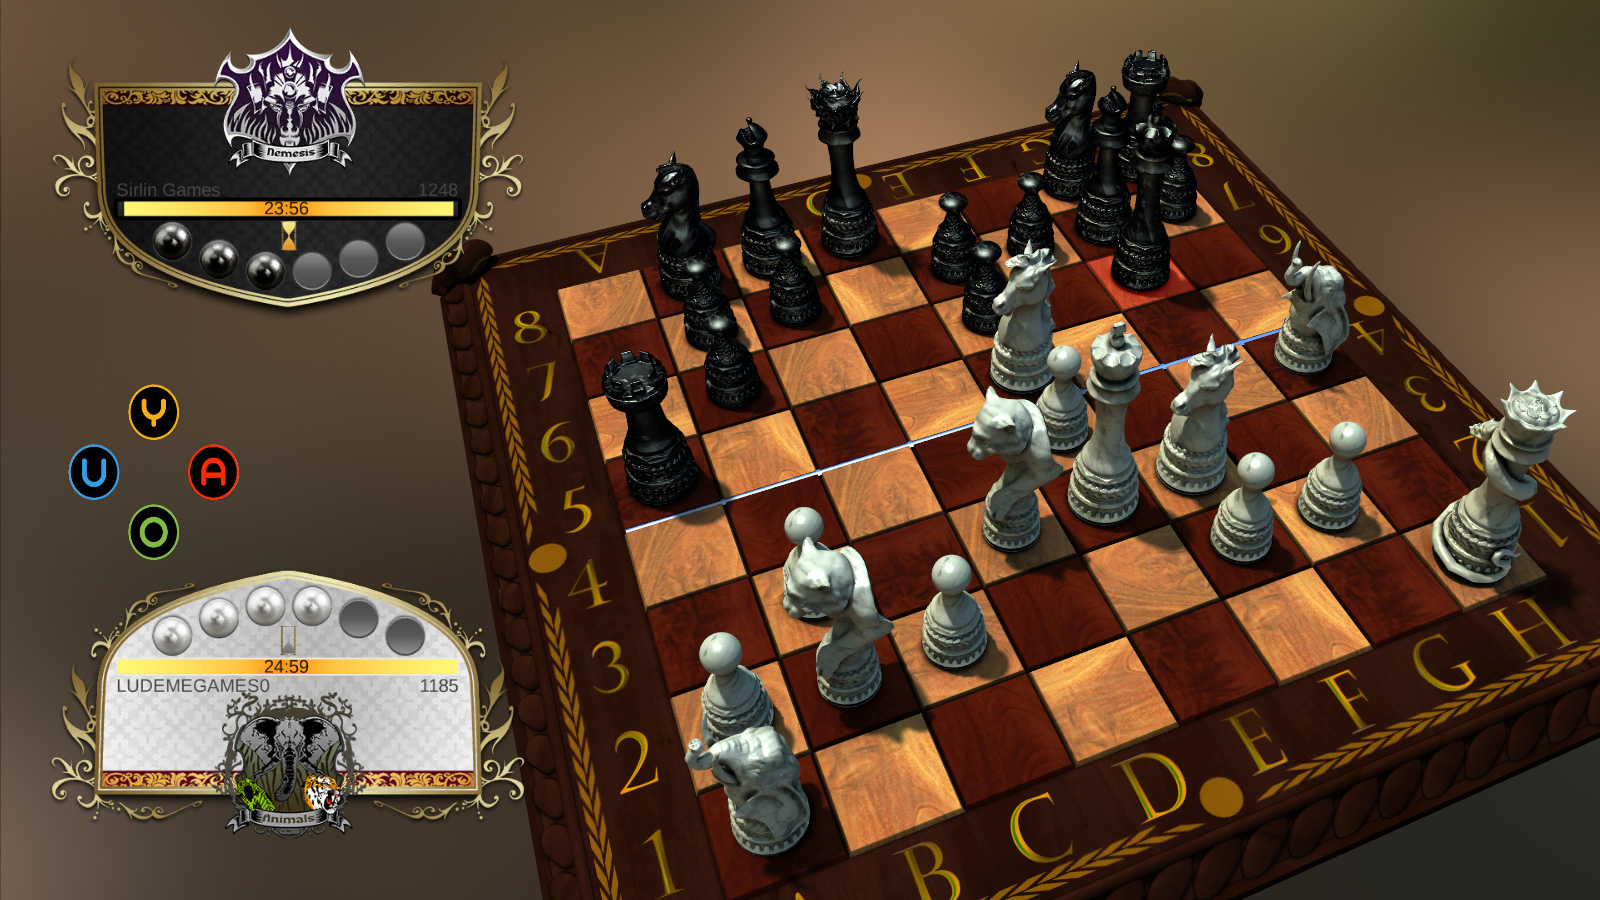 Chess Hotel Multiplayer - 🕹️ Online Game